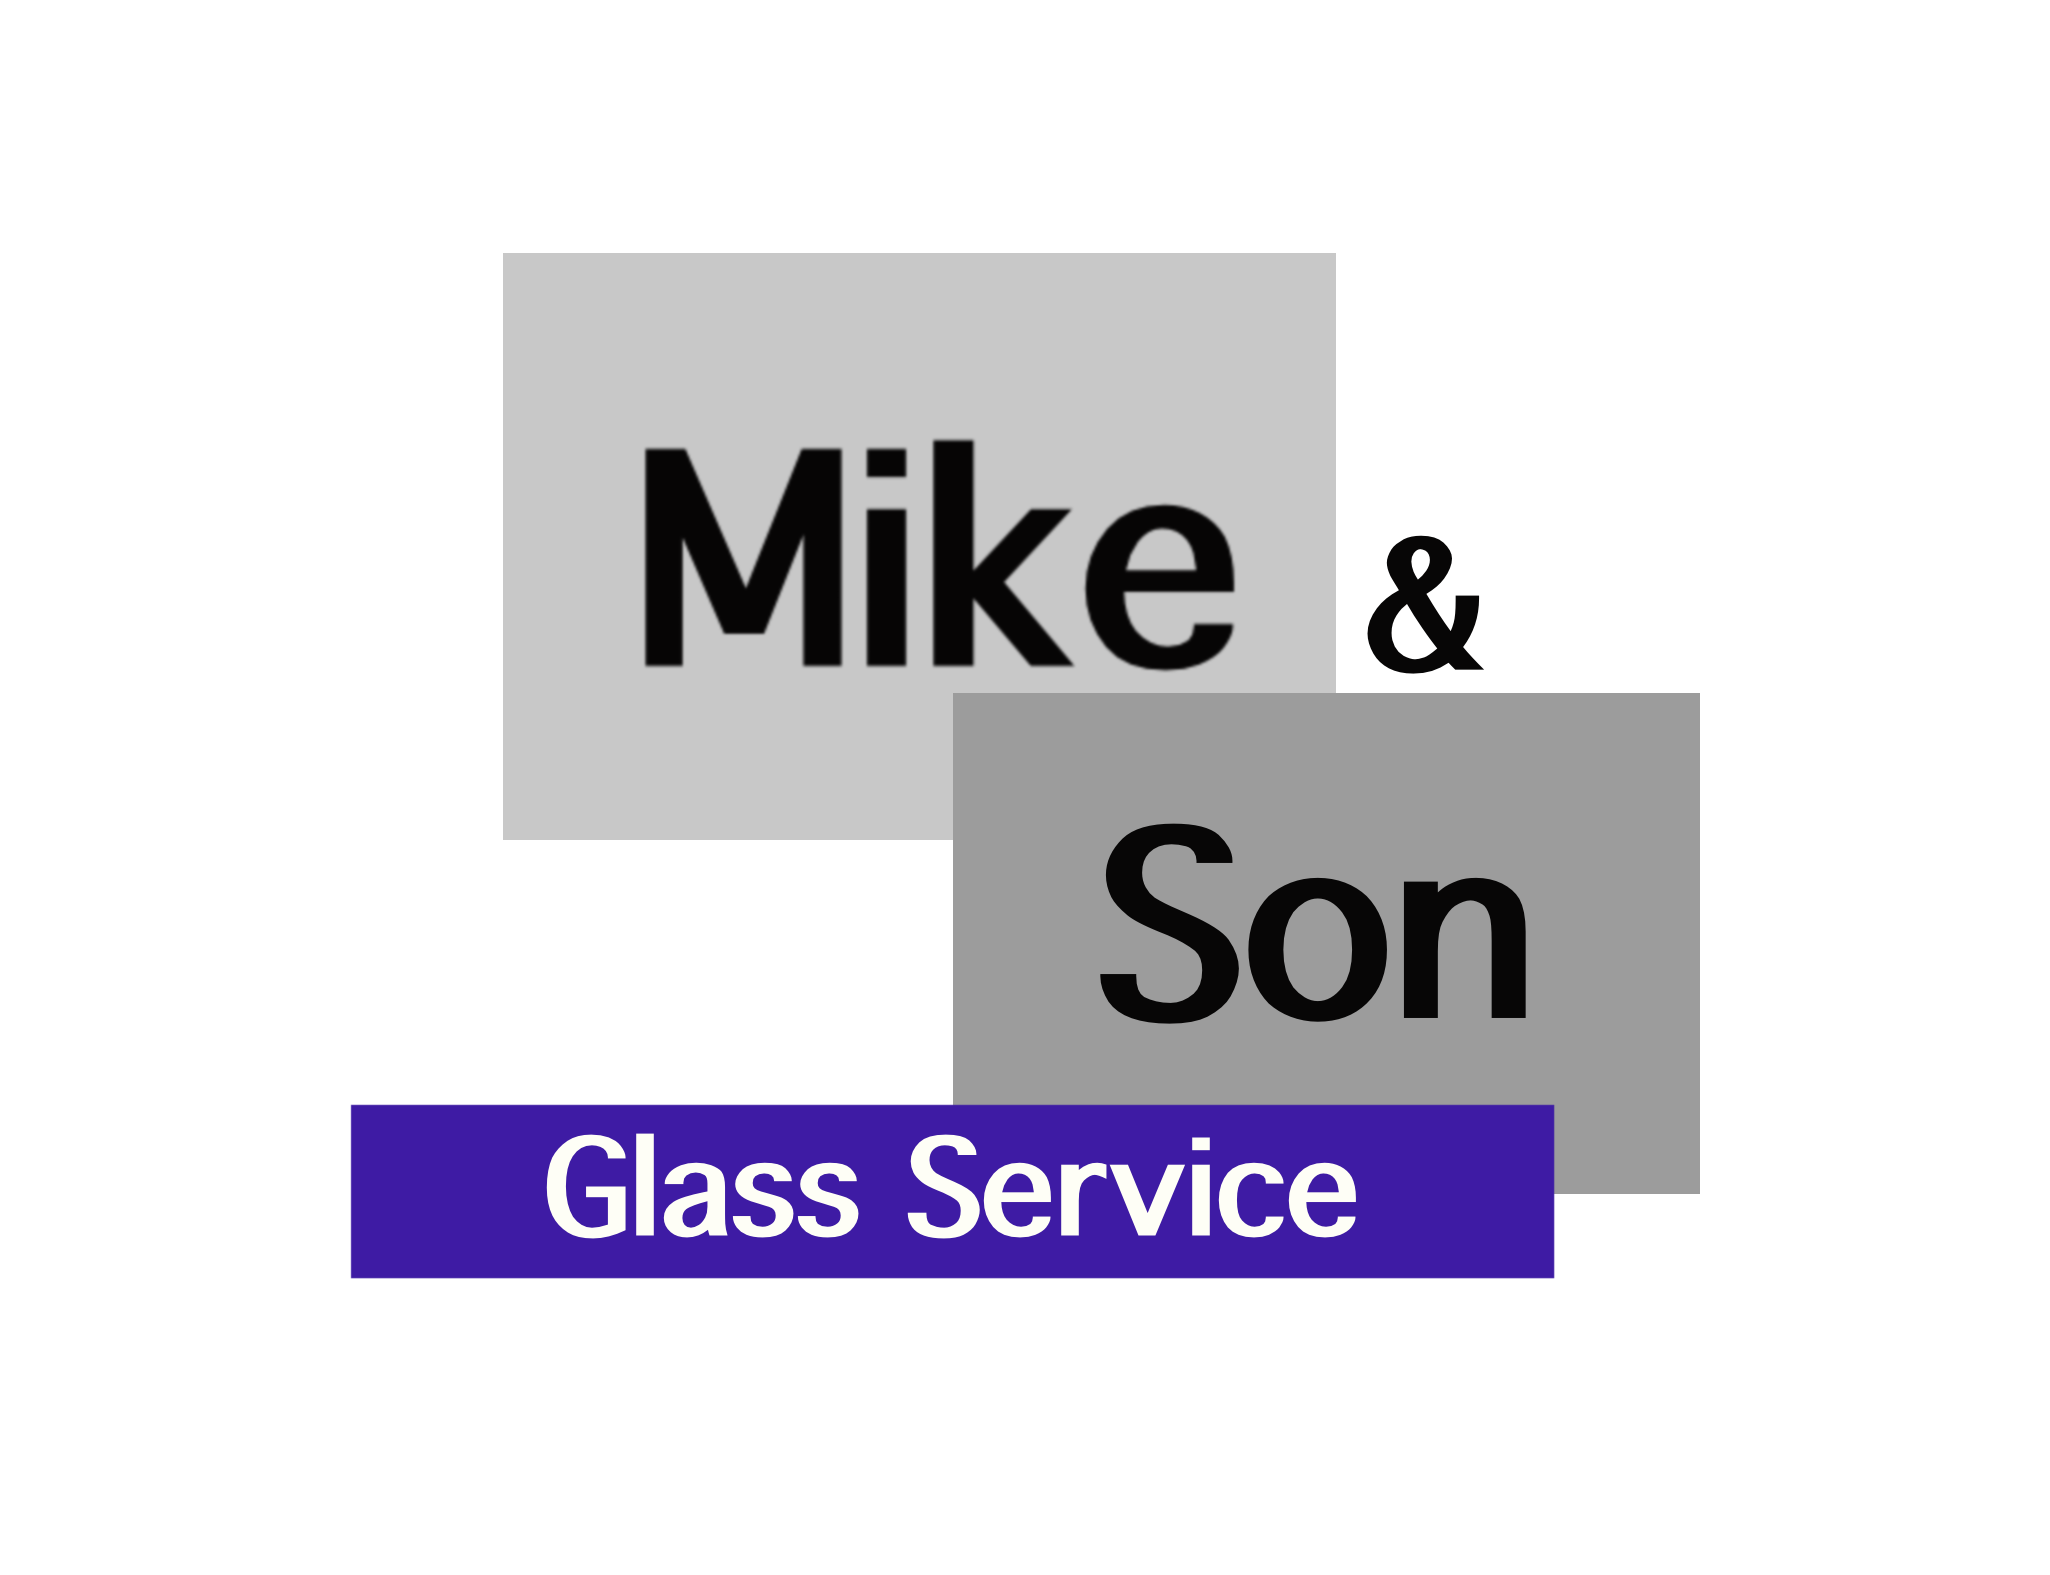 Mike and Son Glass Service